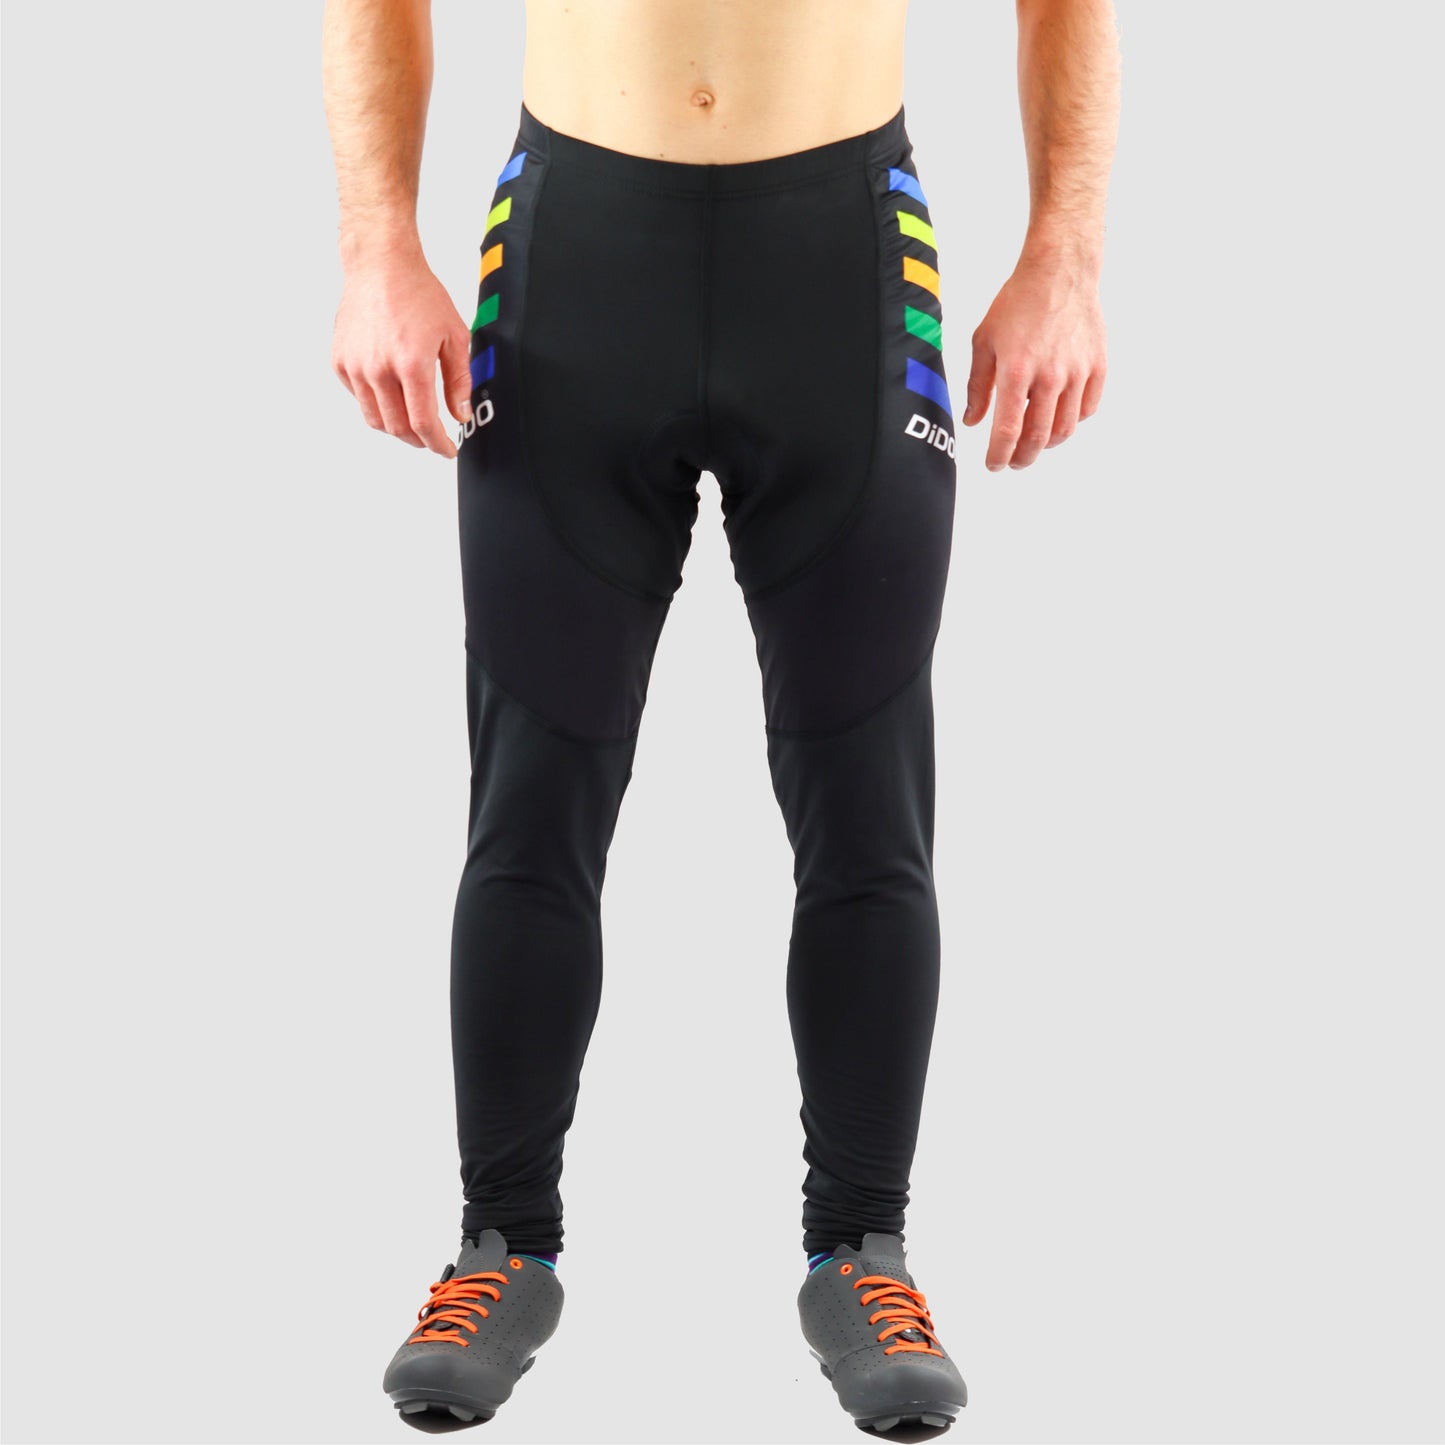 DiDoo Men's Pro Cycling Pants with padding Black and Multi Colour Strips